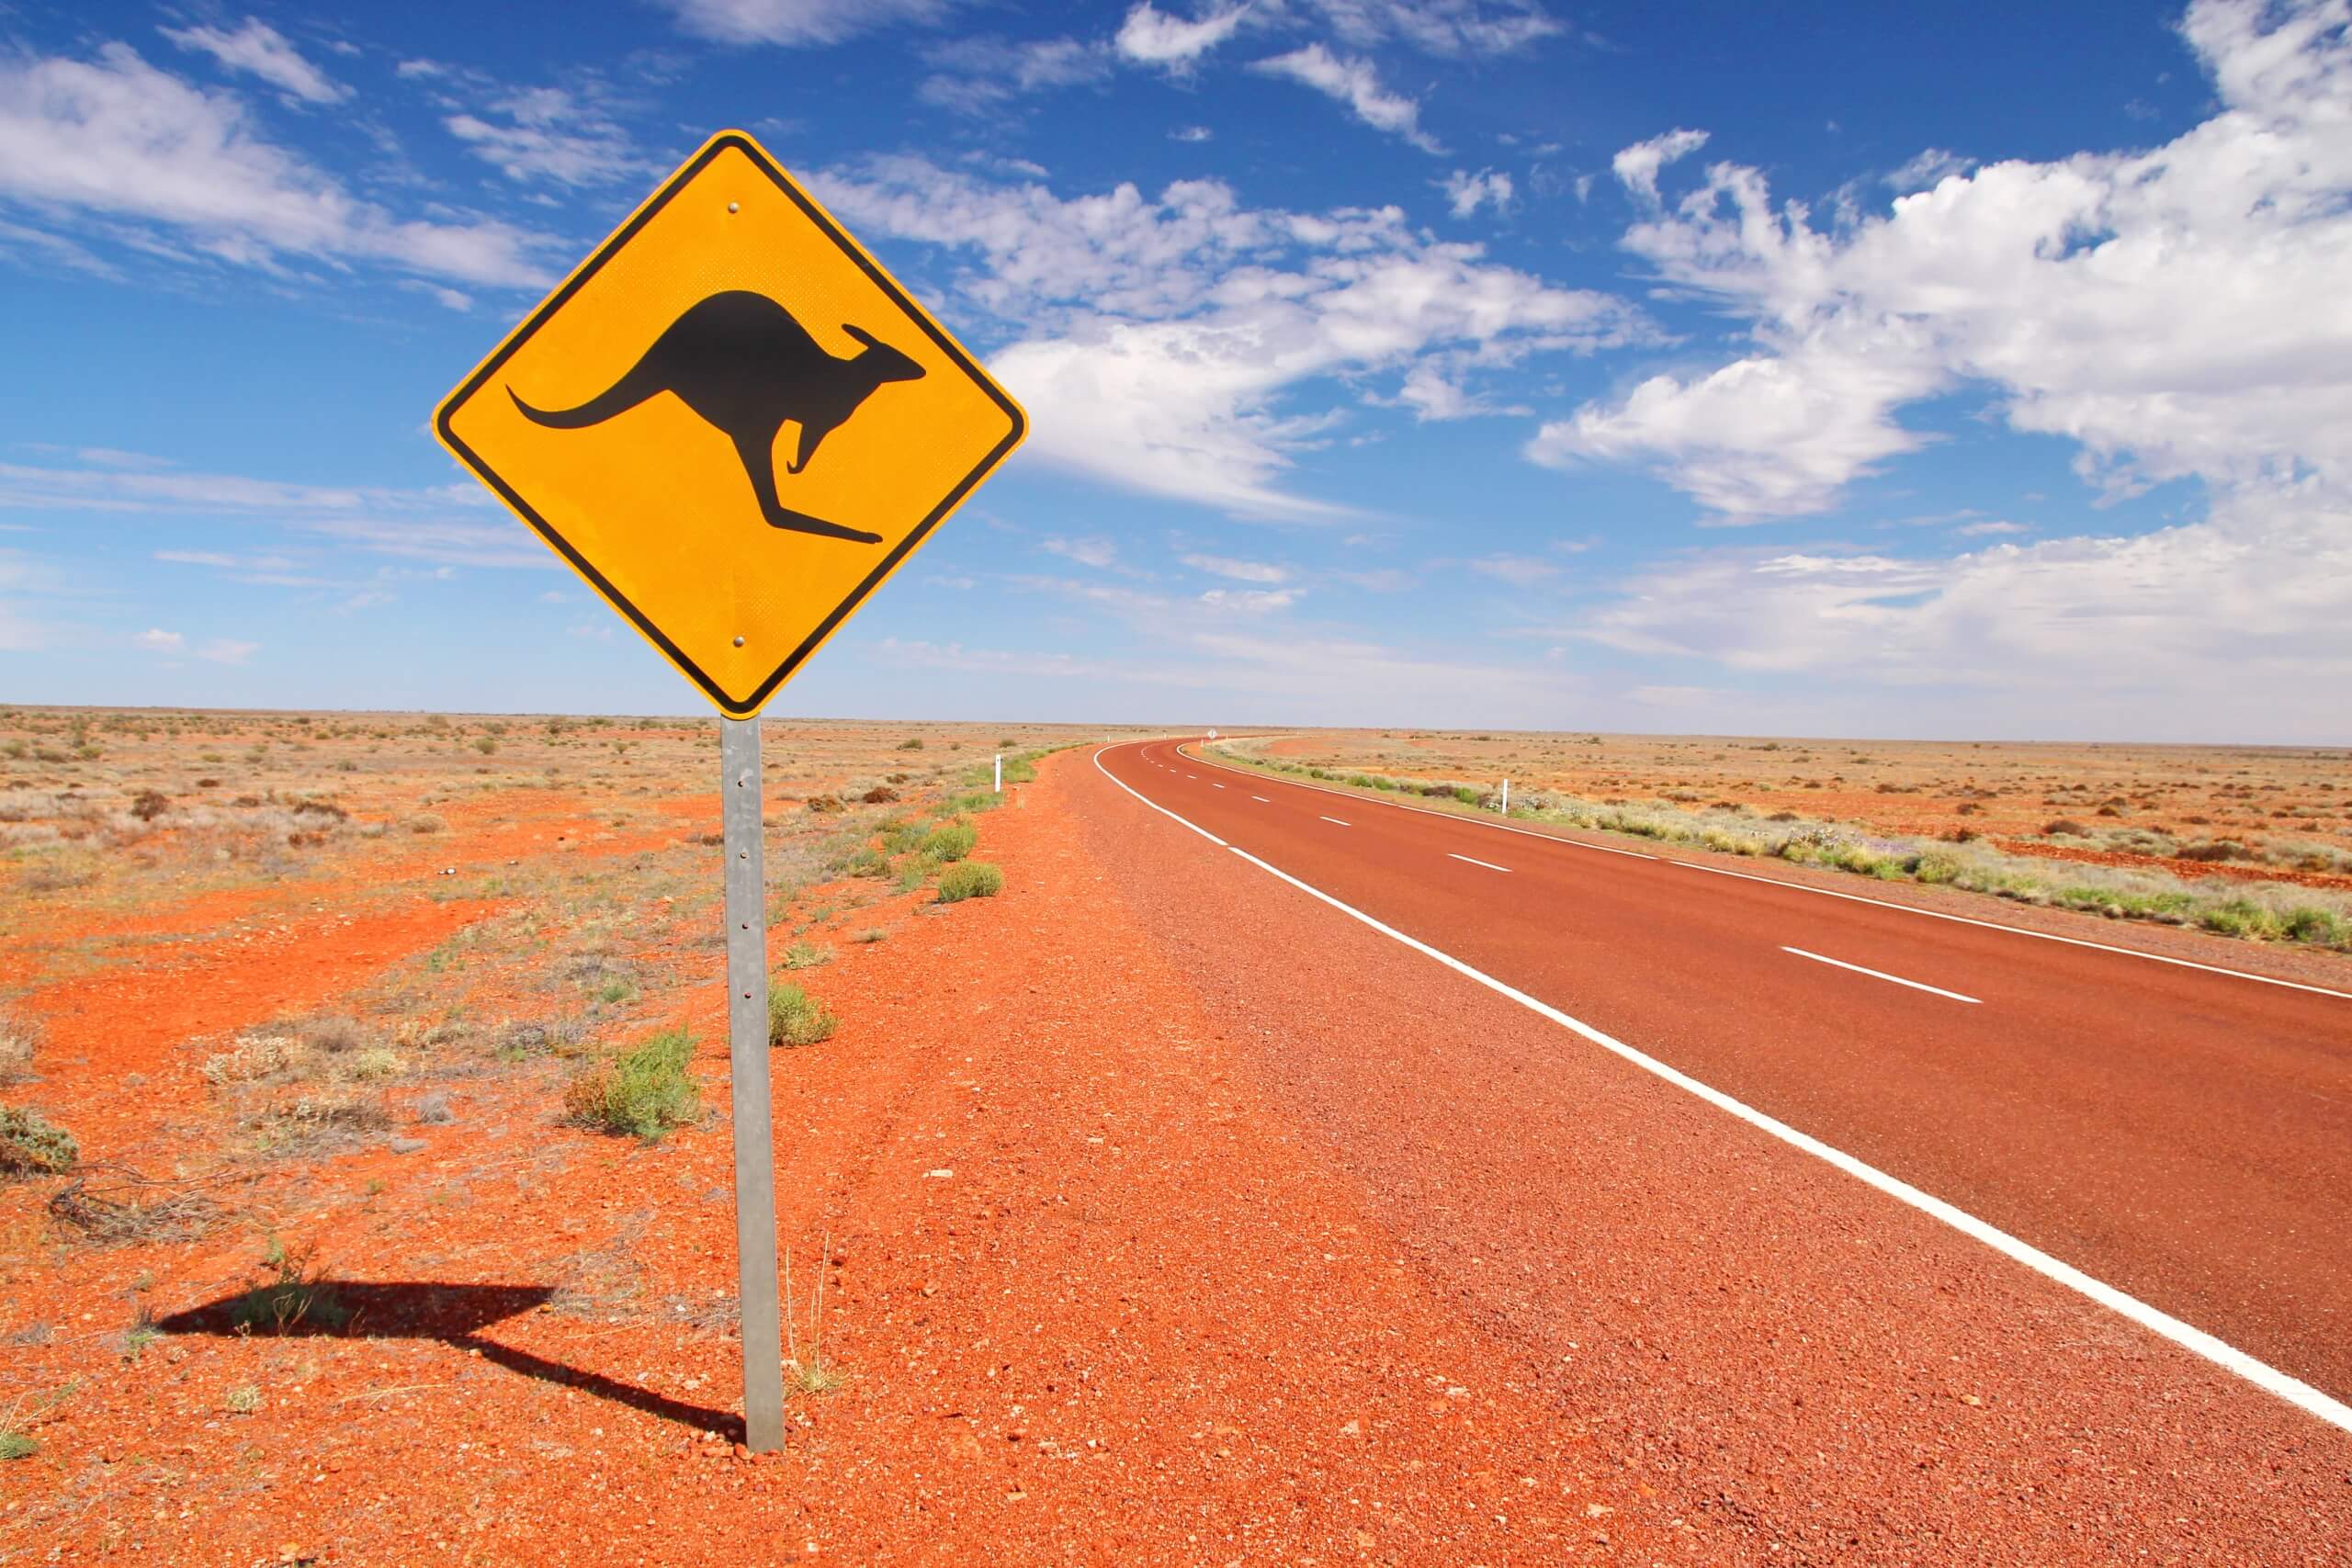 emigrating to Australian endless roads with a sign that alerts about Kangaroos